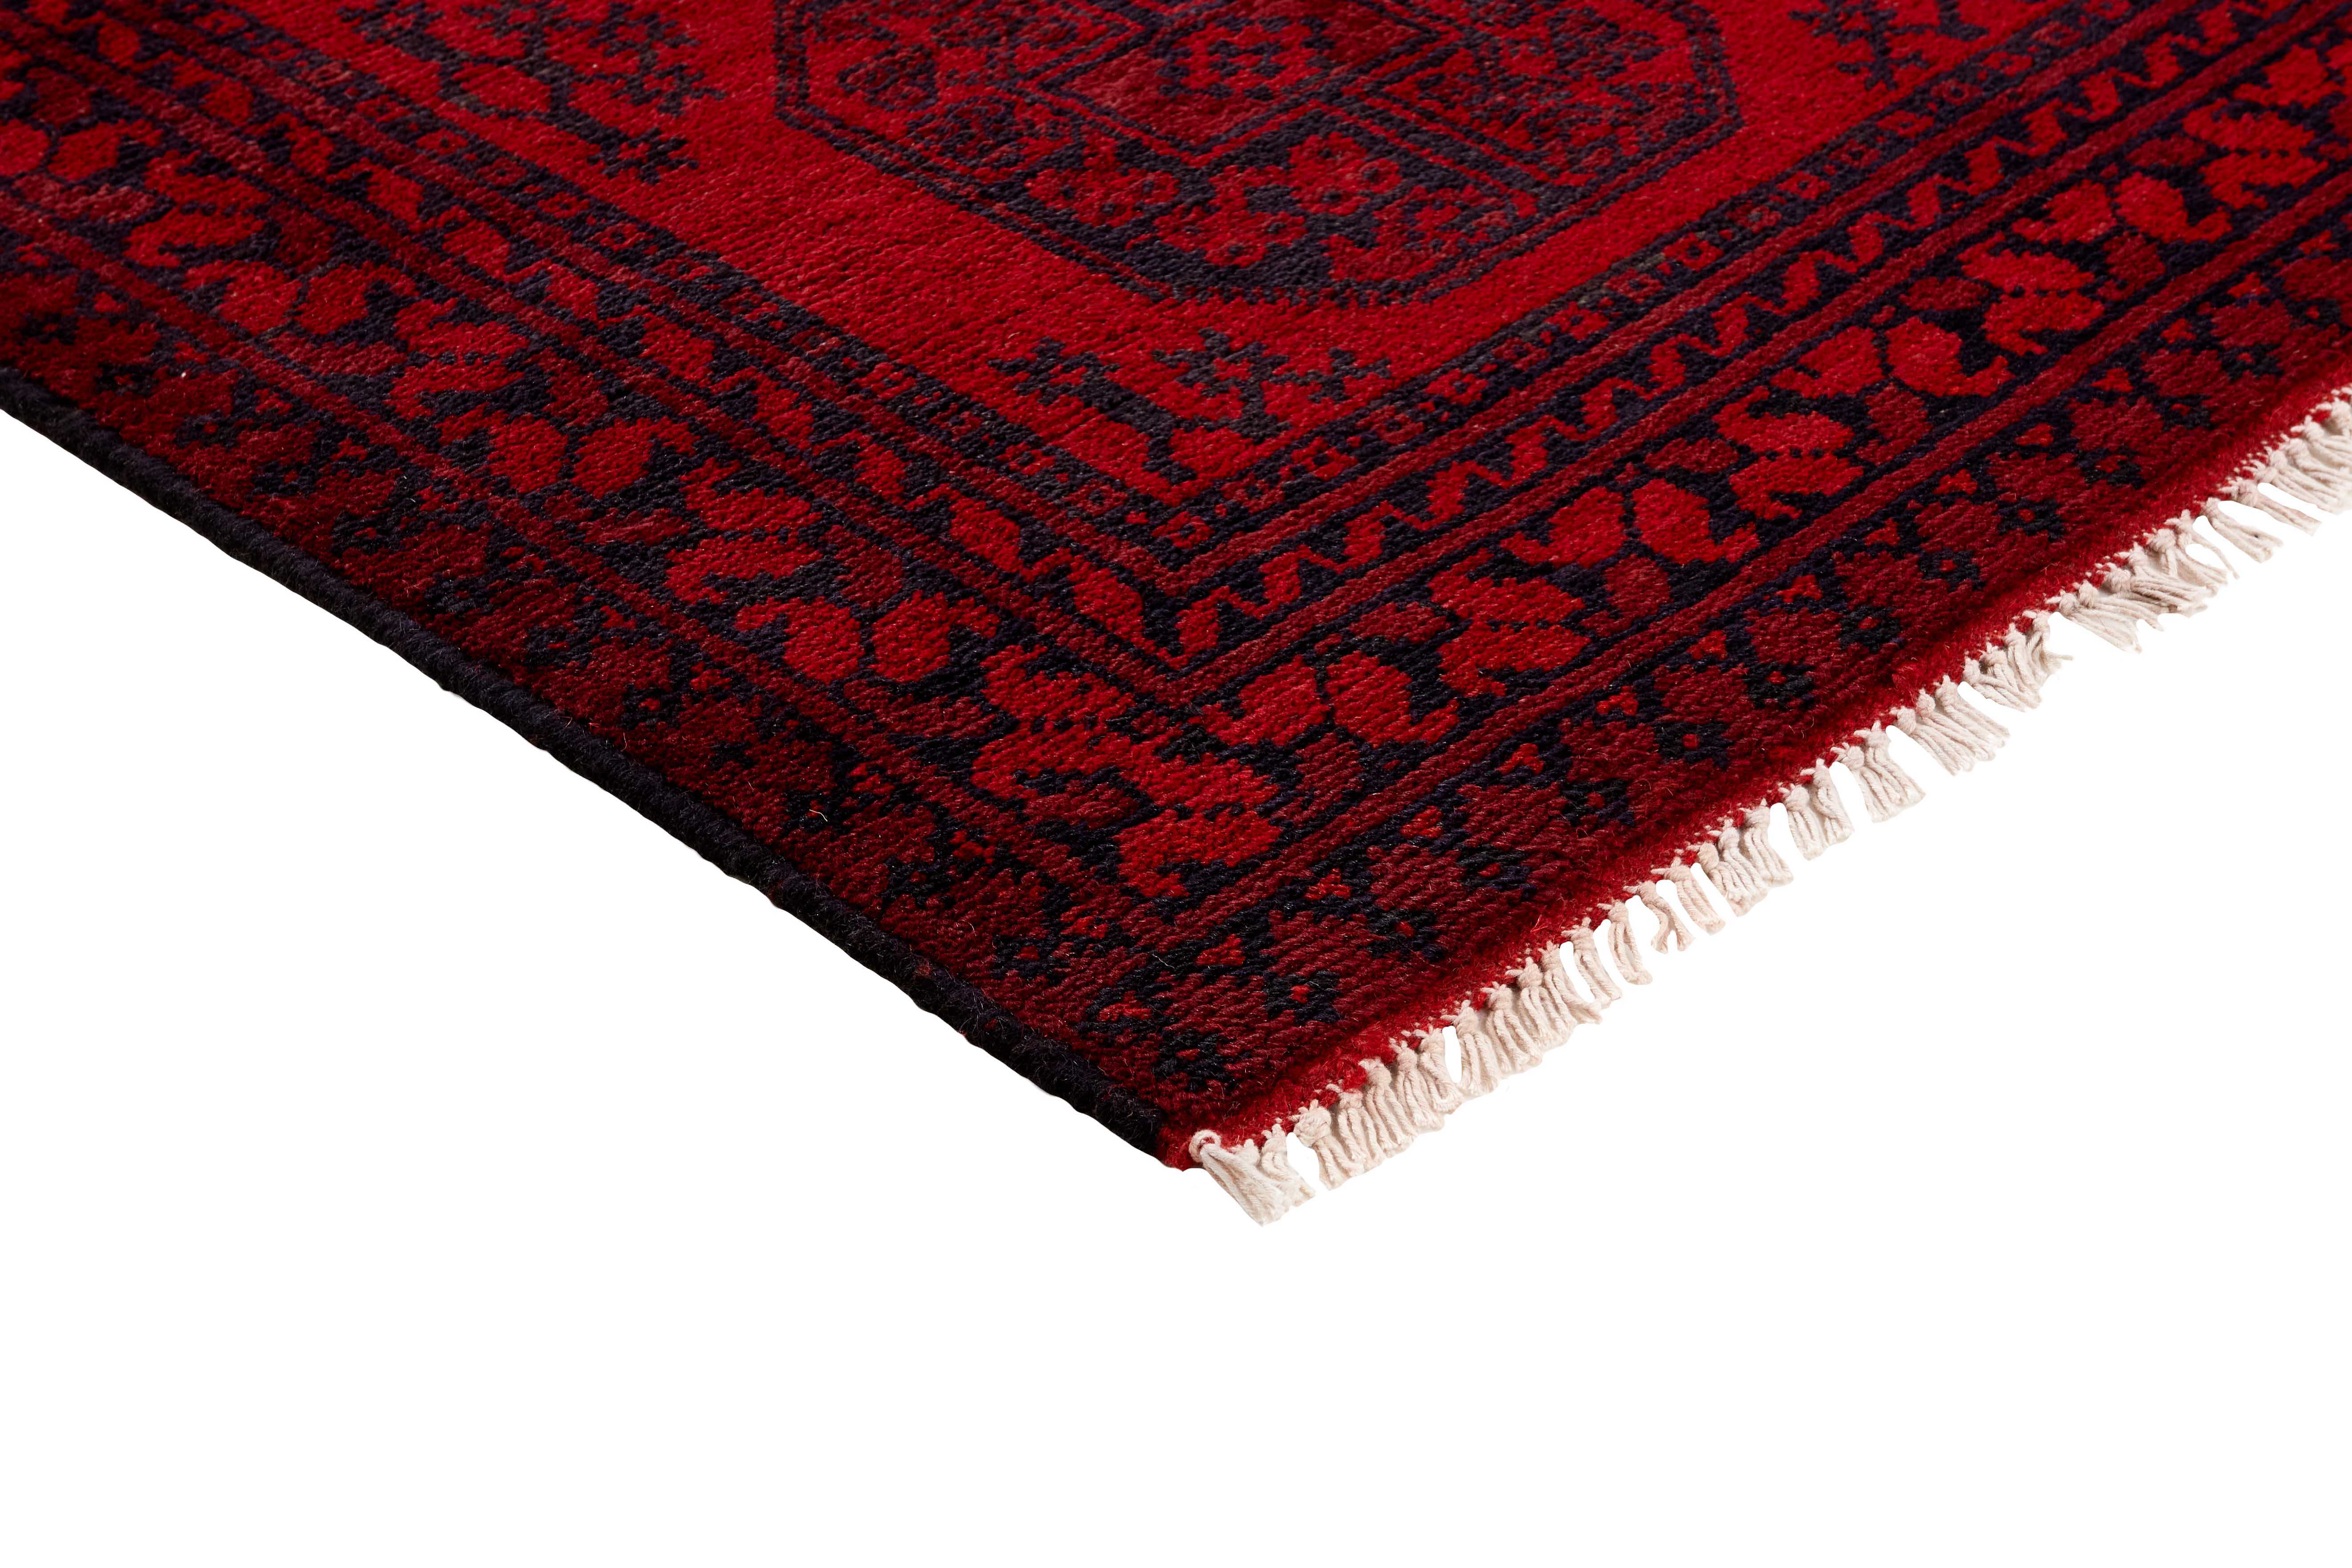 Red Oriental wool runner with a traditional elephant's foot pattern